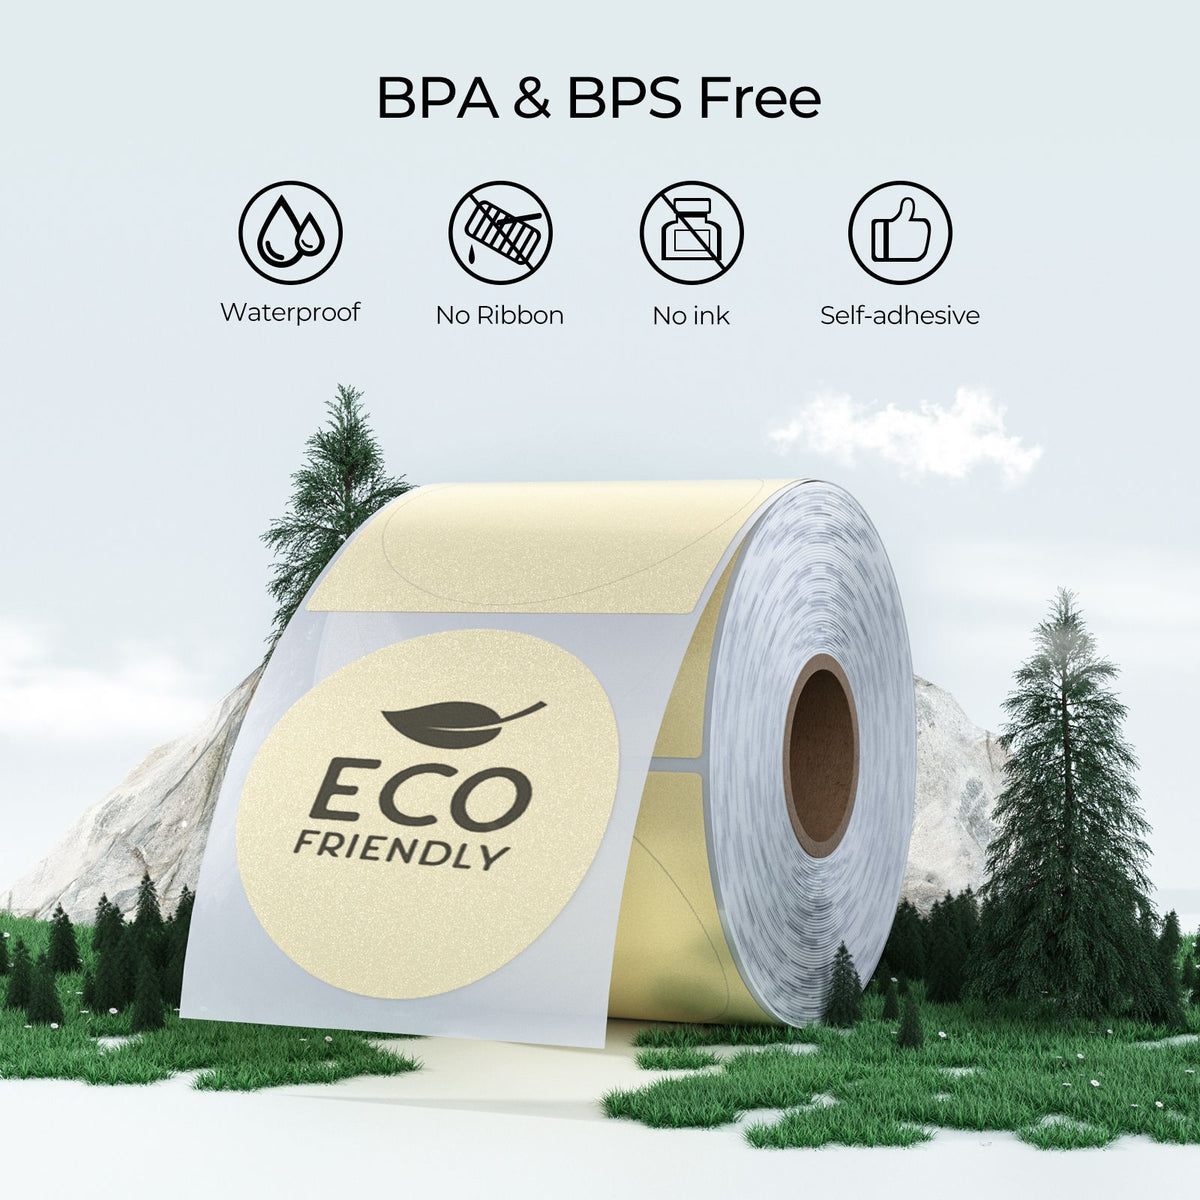 MUNBYN round transparent thermal labels are made of high-quality material that is BPA&BPS free.